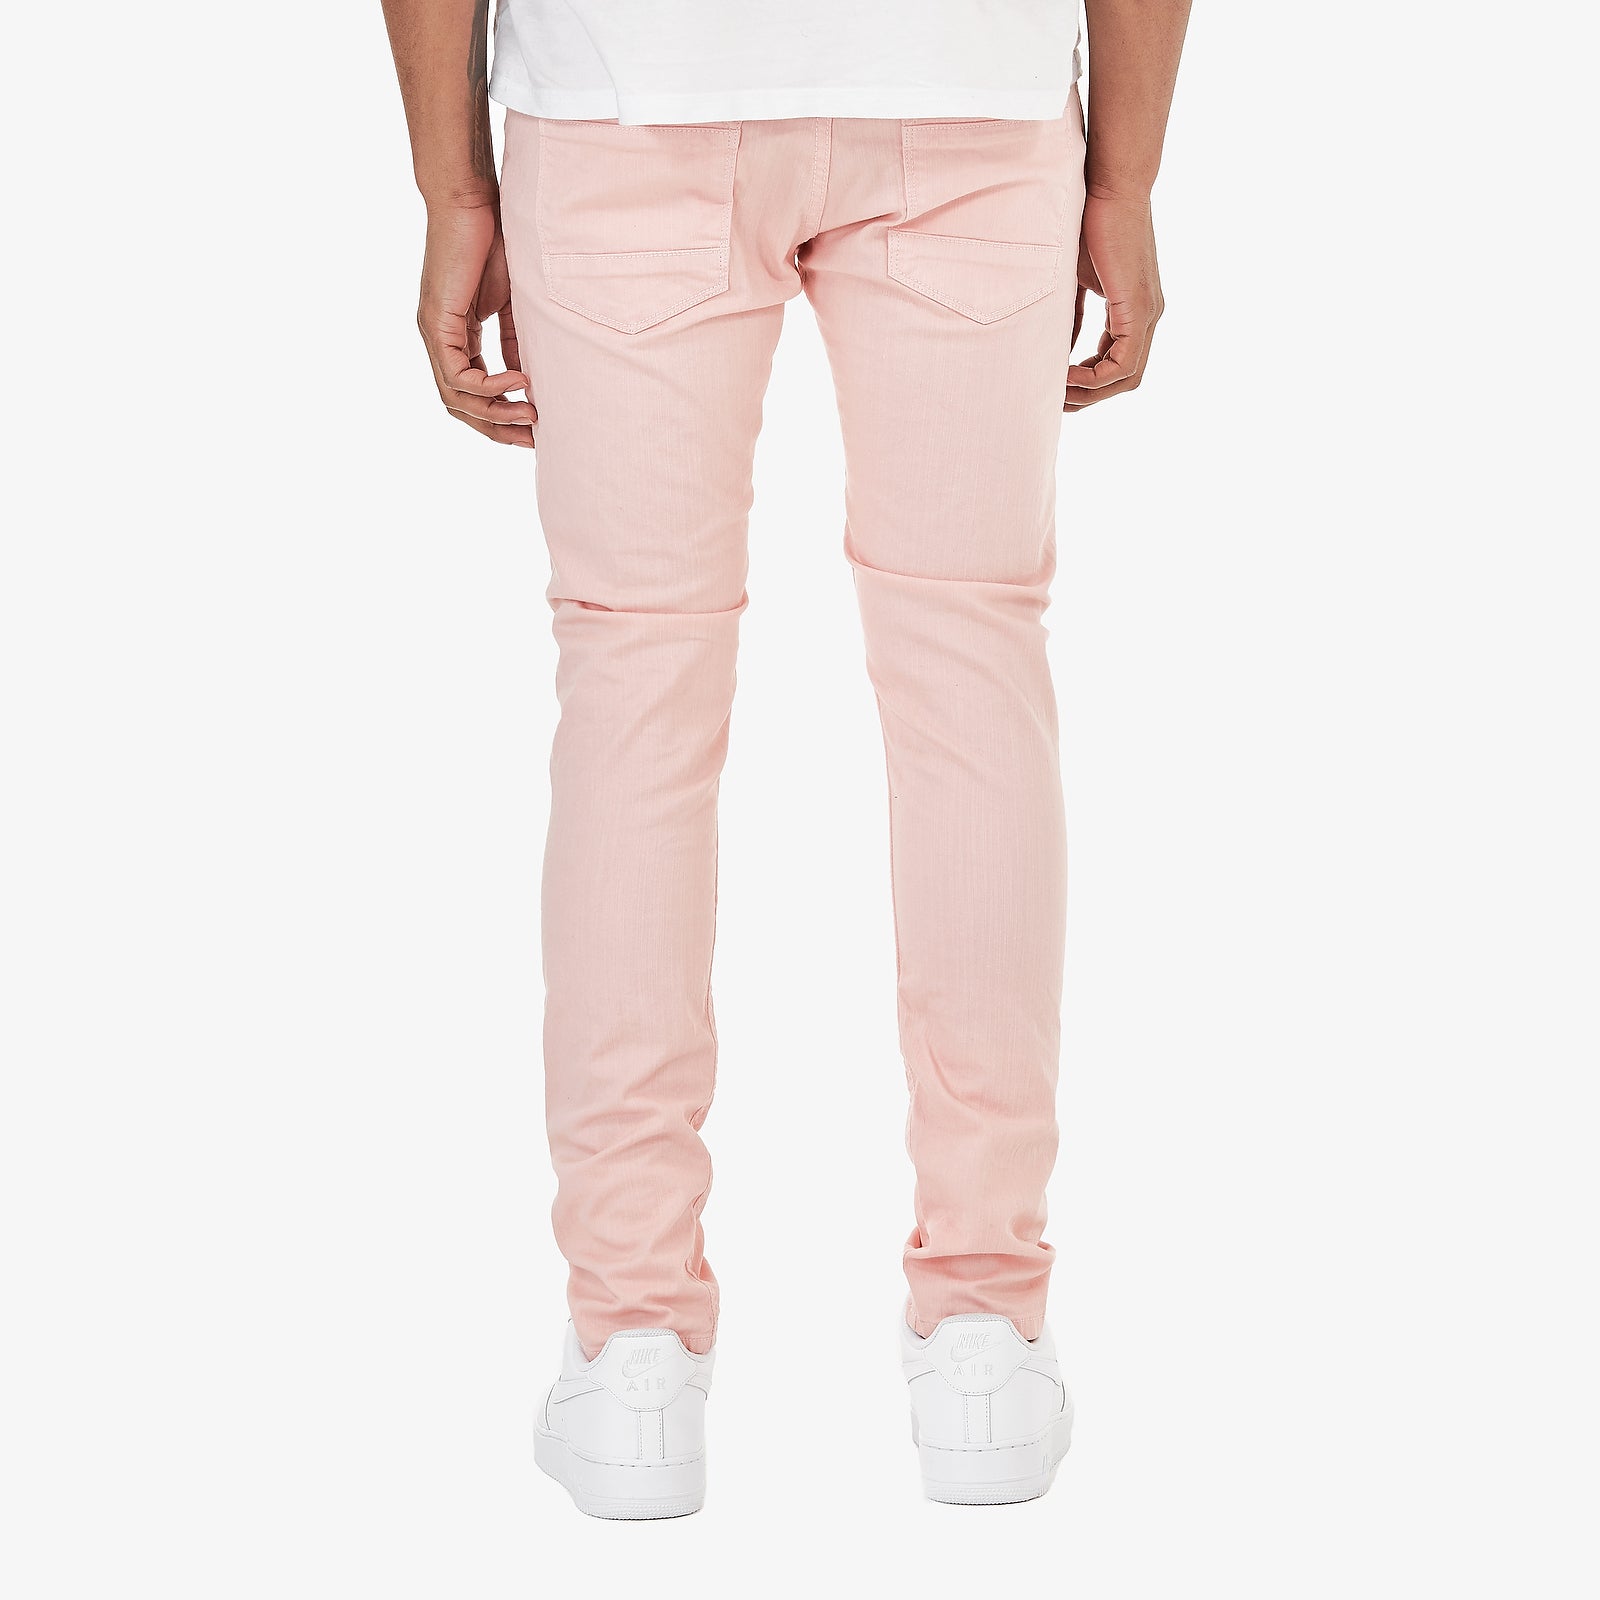 SALMON PINK PANTS WITH RIPS & PERMANENT WRINKLES